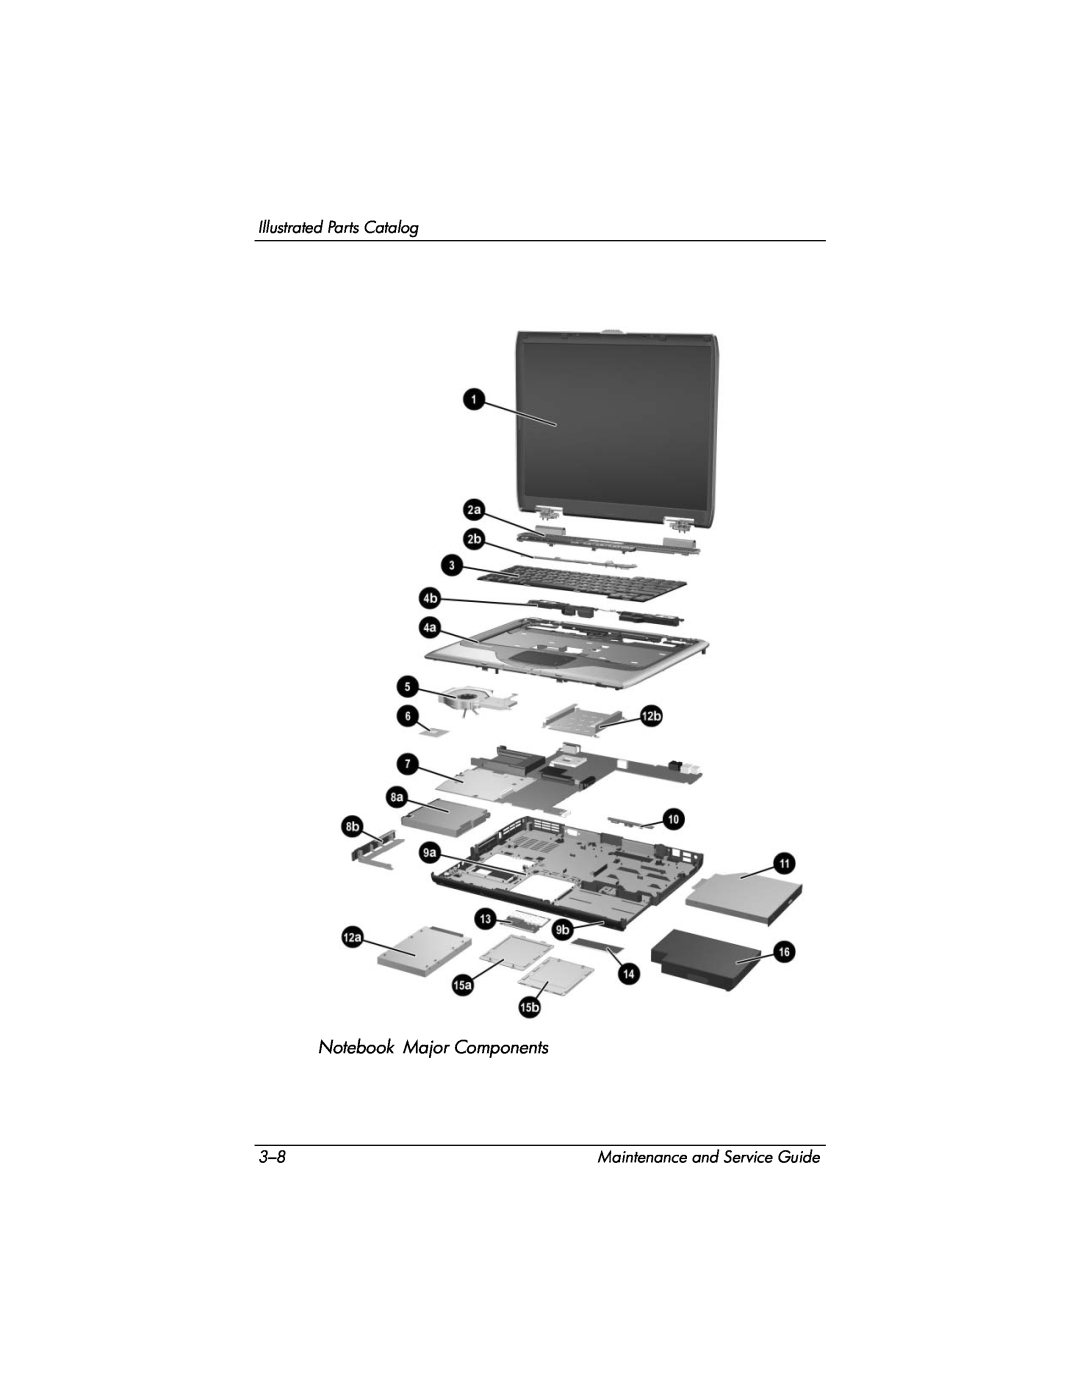 HP NX9020, NX9040, NX9030, ZE4900 manual Notebook Major Components, Illustrated Parts Catalog, Maintenance and Service Guide 